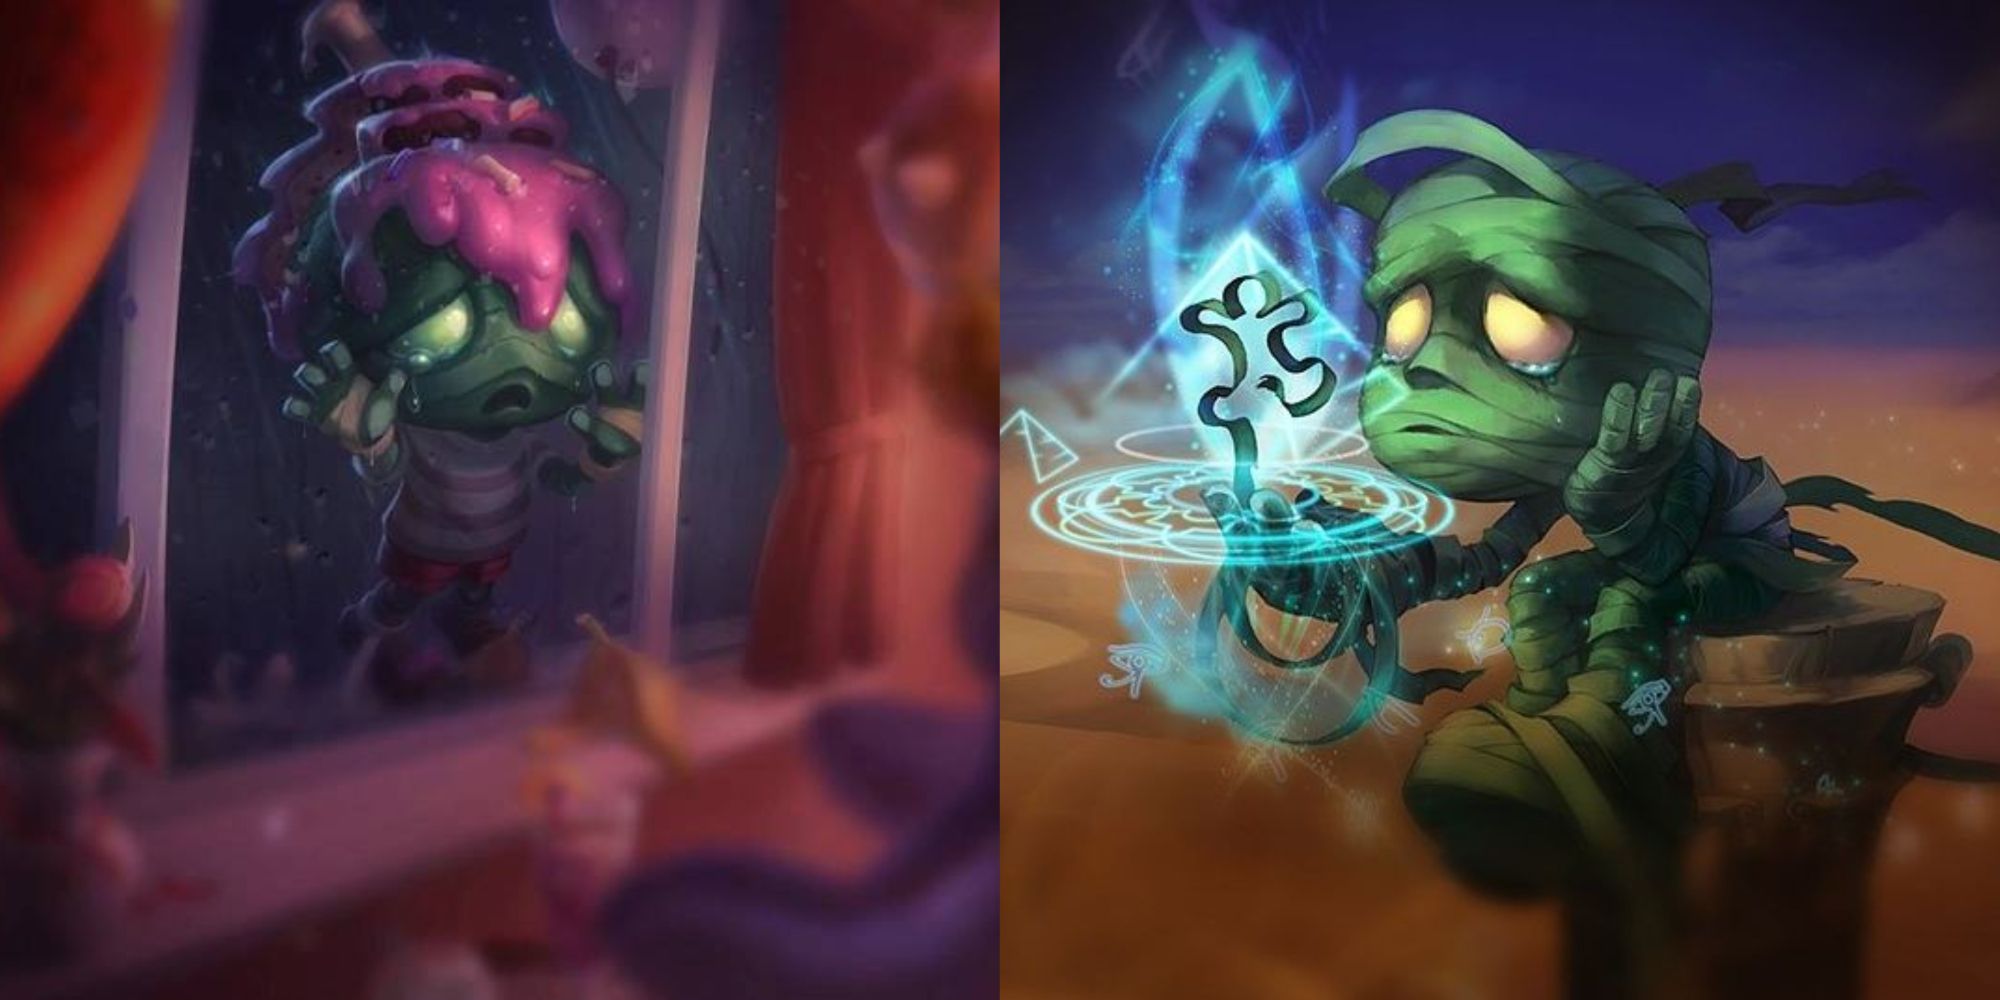 Surprise Party Amumu not being able to attend his own party, Amumu making a friend out of his wrappings in a desert